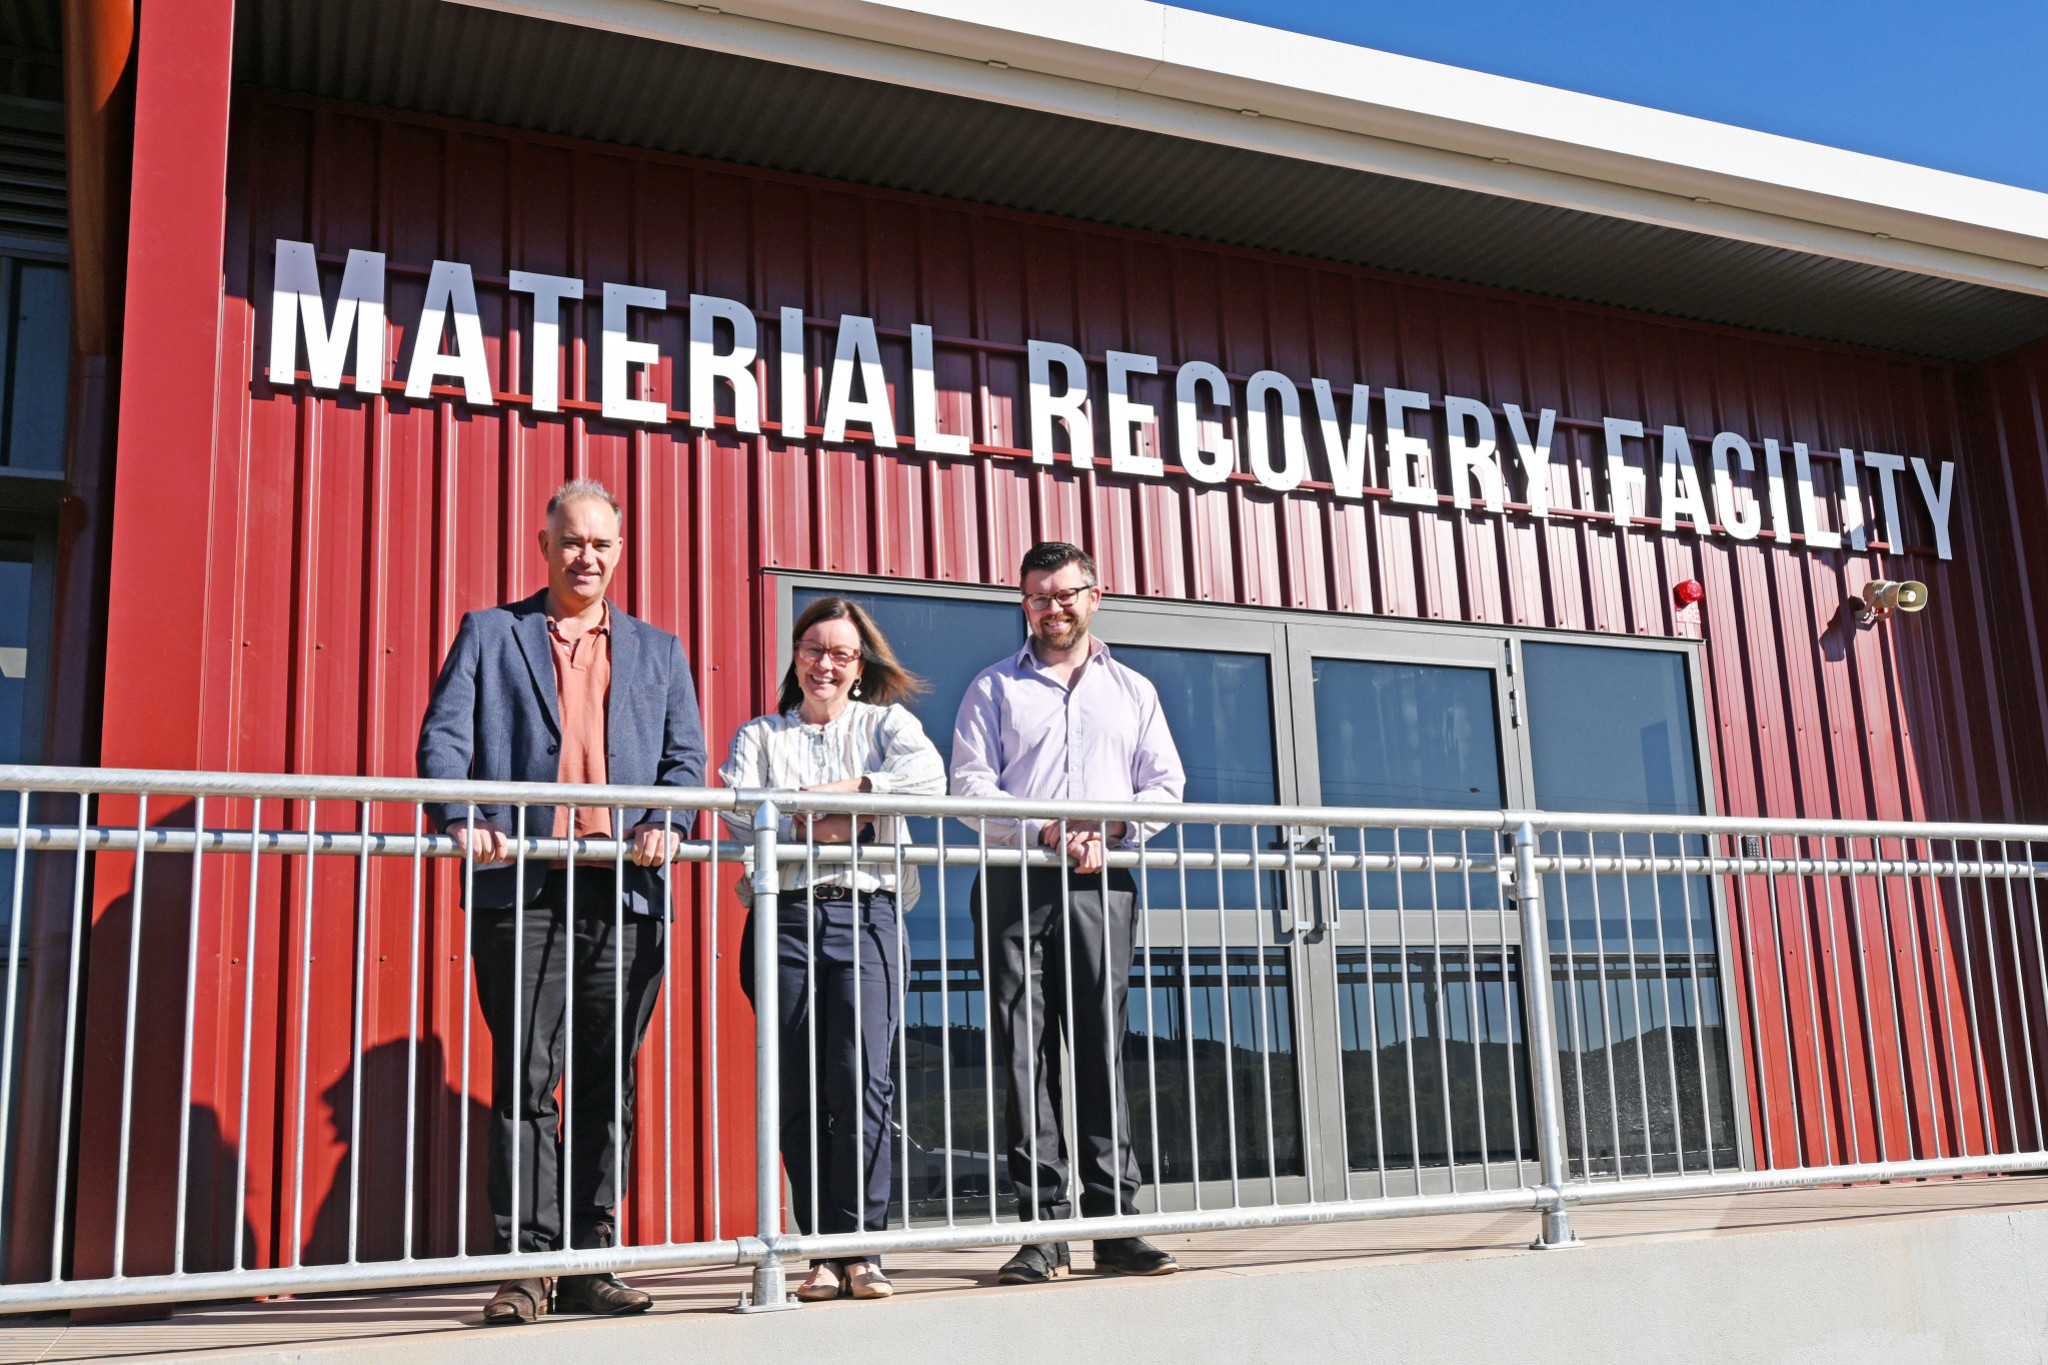 Mount Isa City Council CEO Tim Rose, mayor Peta MacRae and community services director Chad King outside the new material recovery facility that will soon be full of equipment used for sorting recyclable goods.